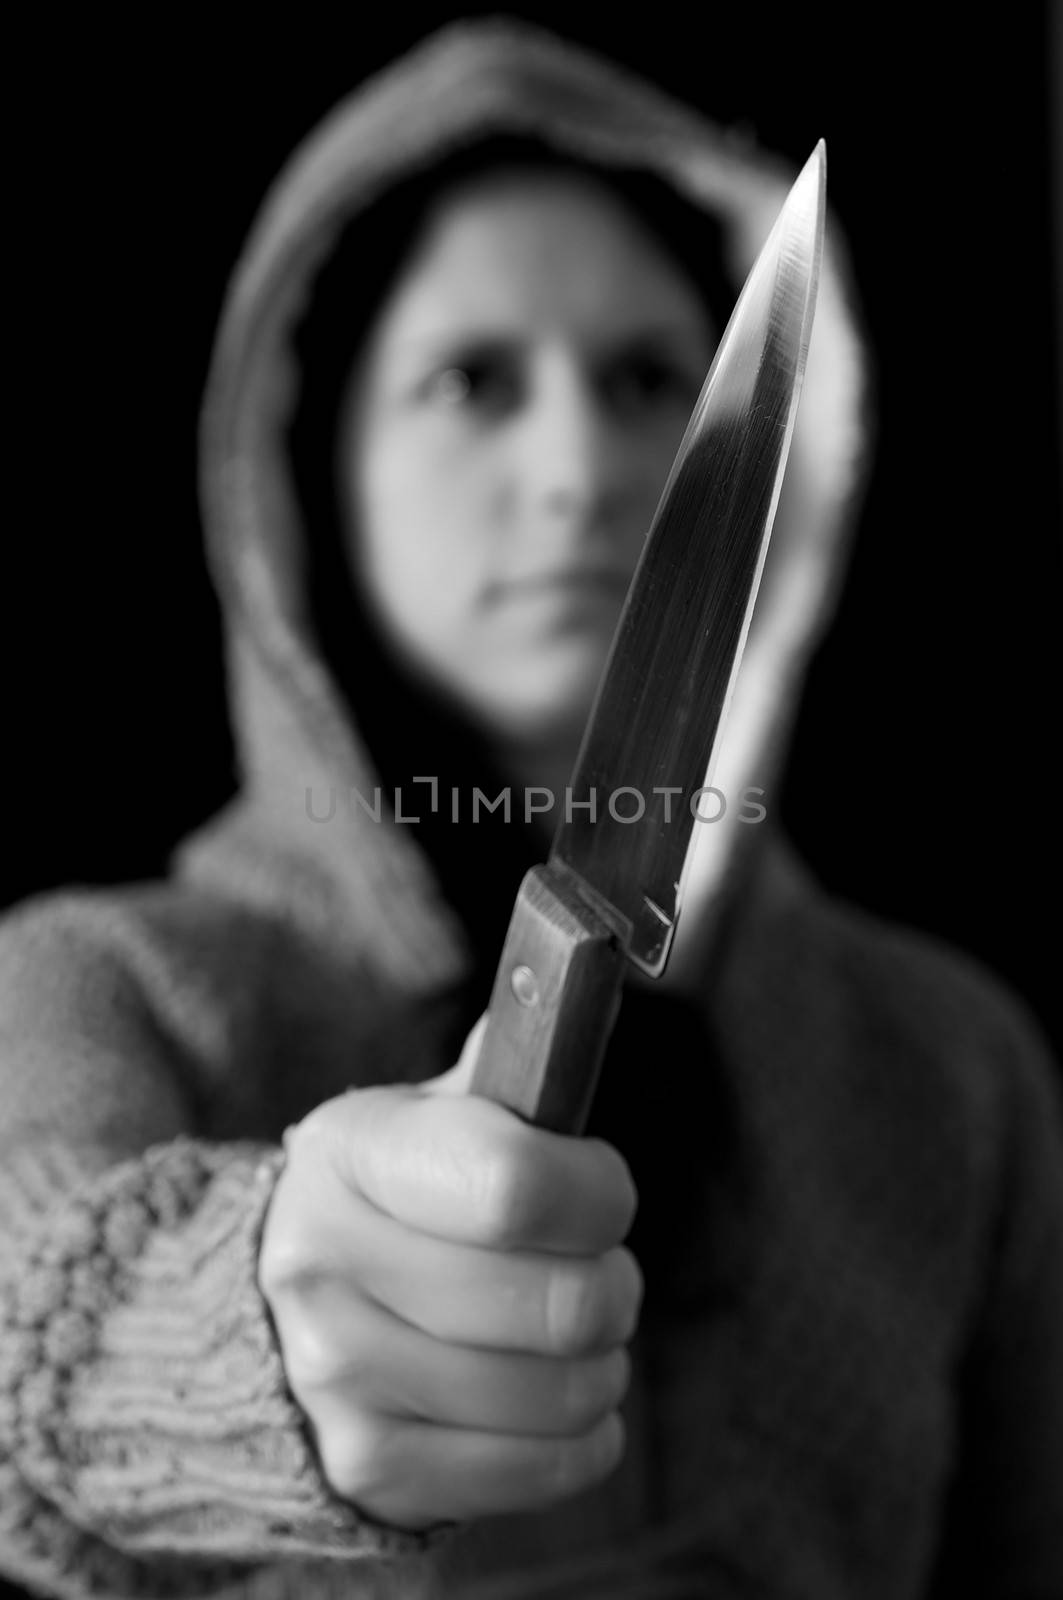 Girl holding a knife by anderm